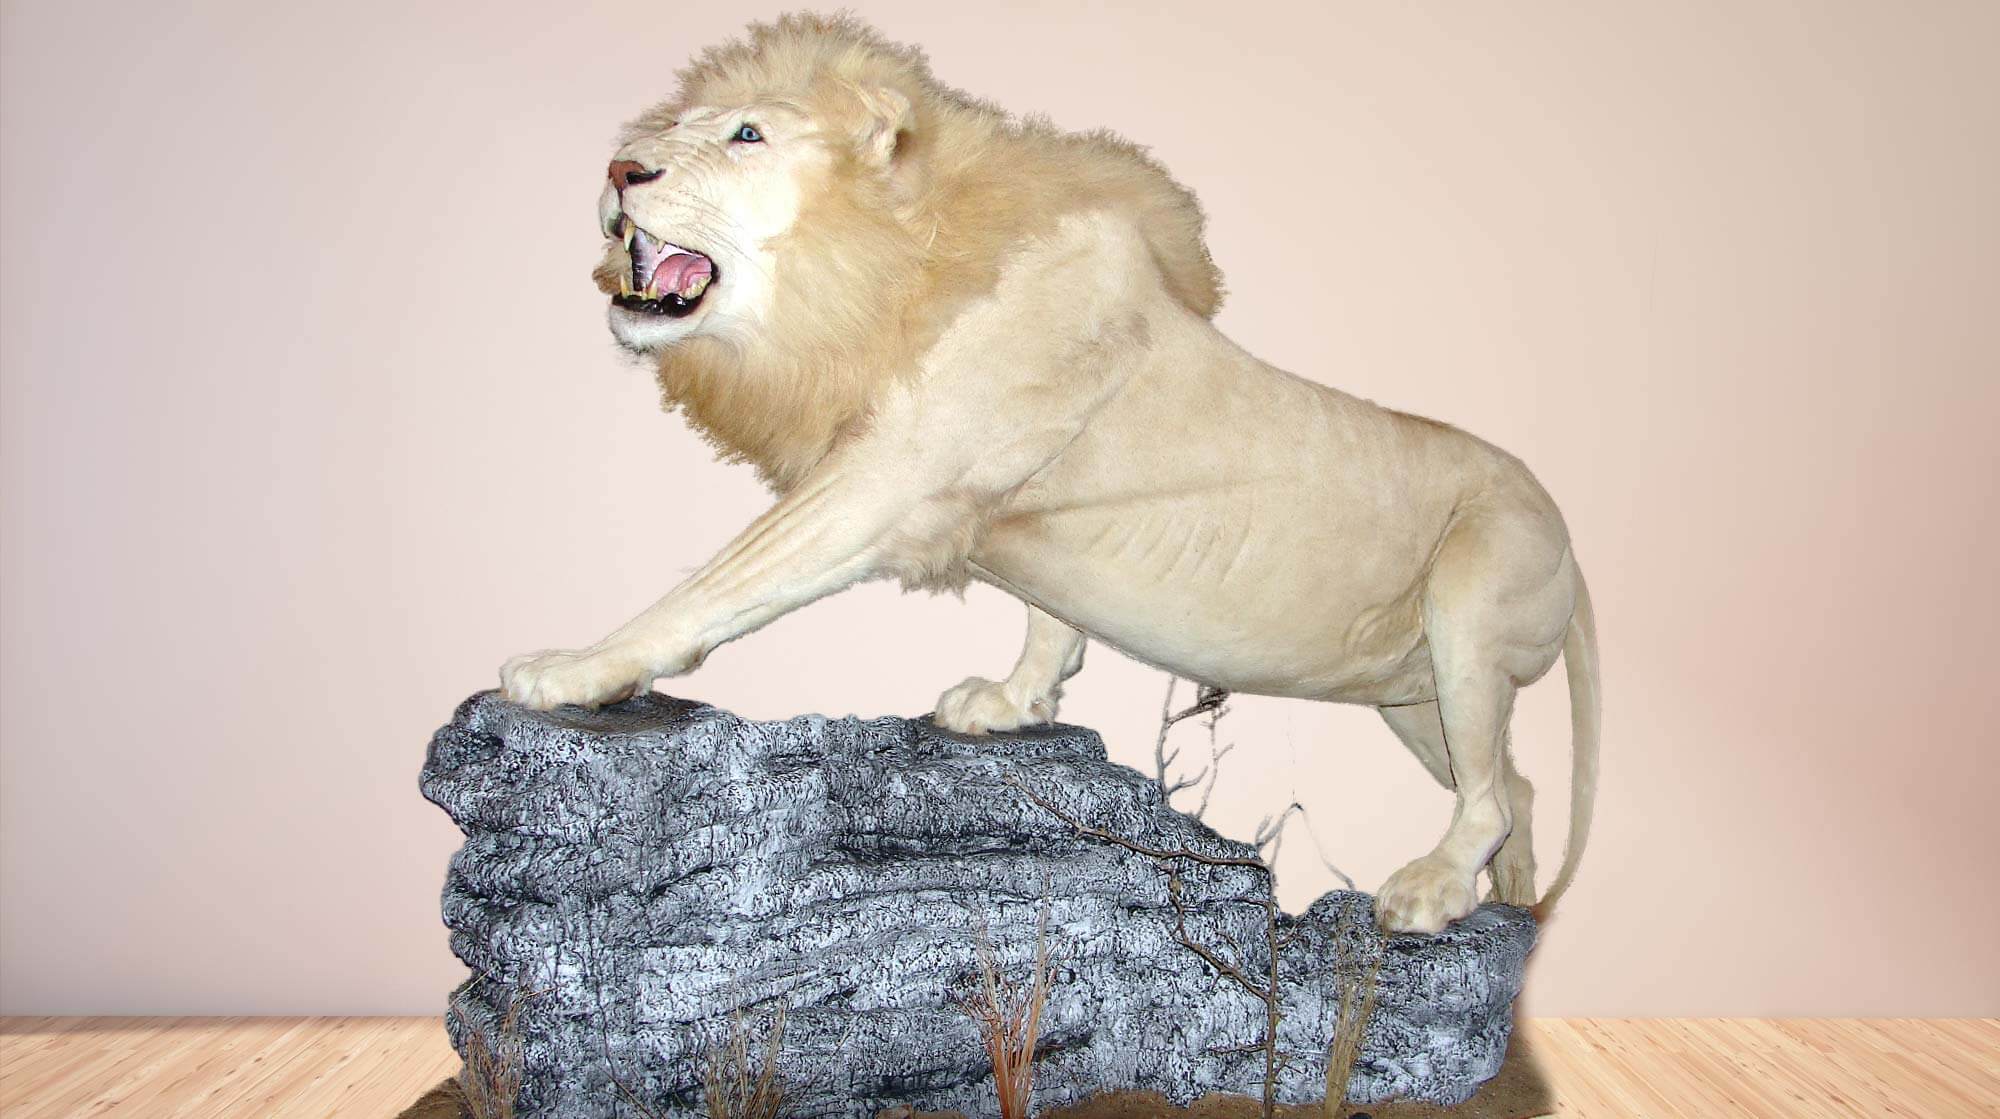 Life size mount of a white maile lion standing on a rock